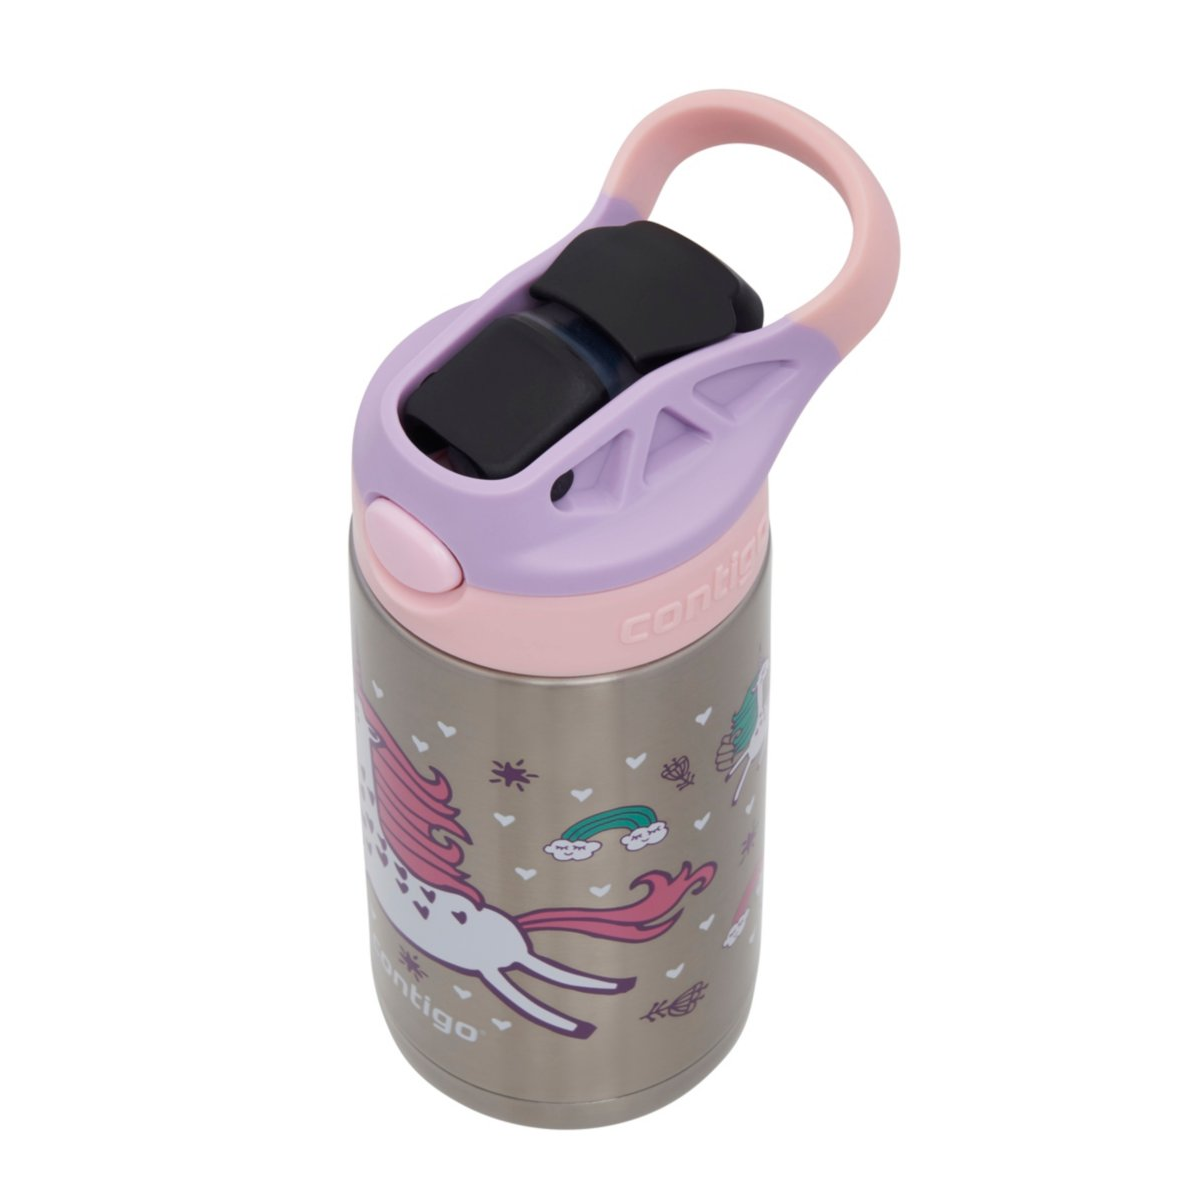 Contigo Kids Thermal Drinking Bottle Easy Clean Autospout with Straw,  BPA-Free Stainless Steel Water…See more Contigo Kids Thermal Drinking  Bottle